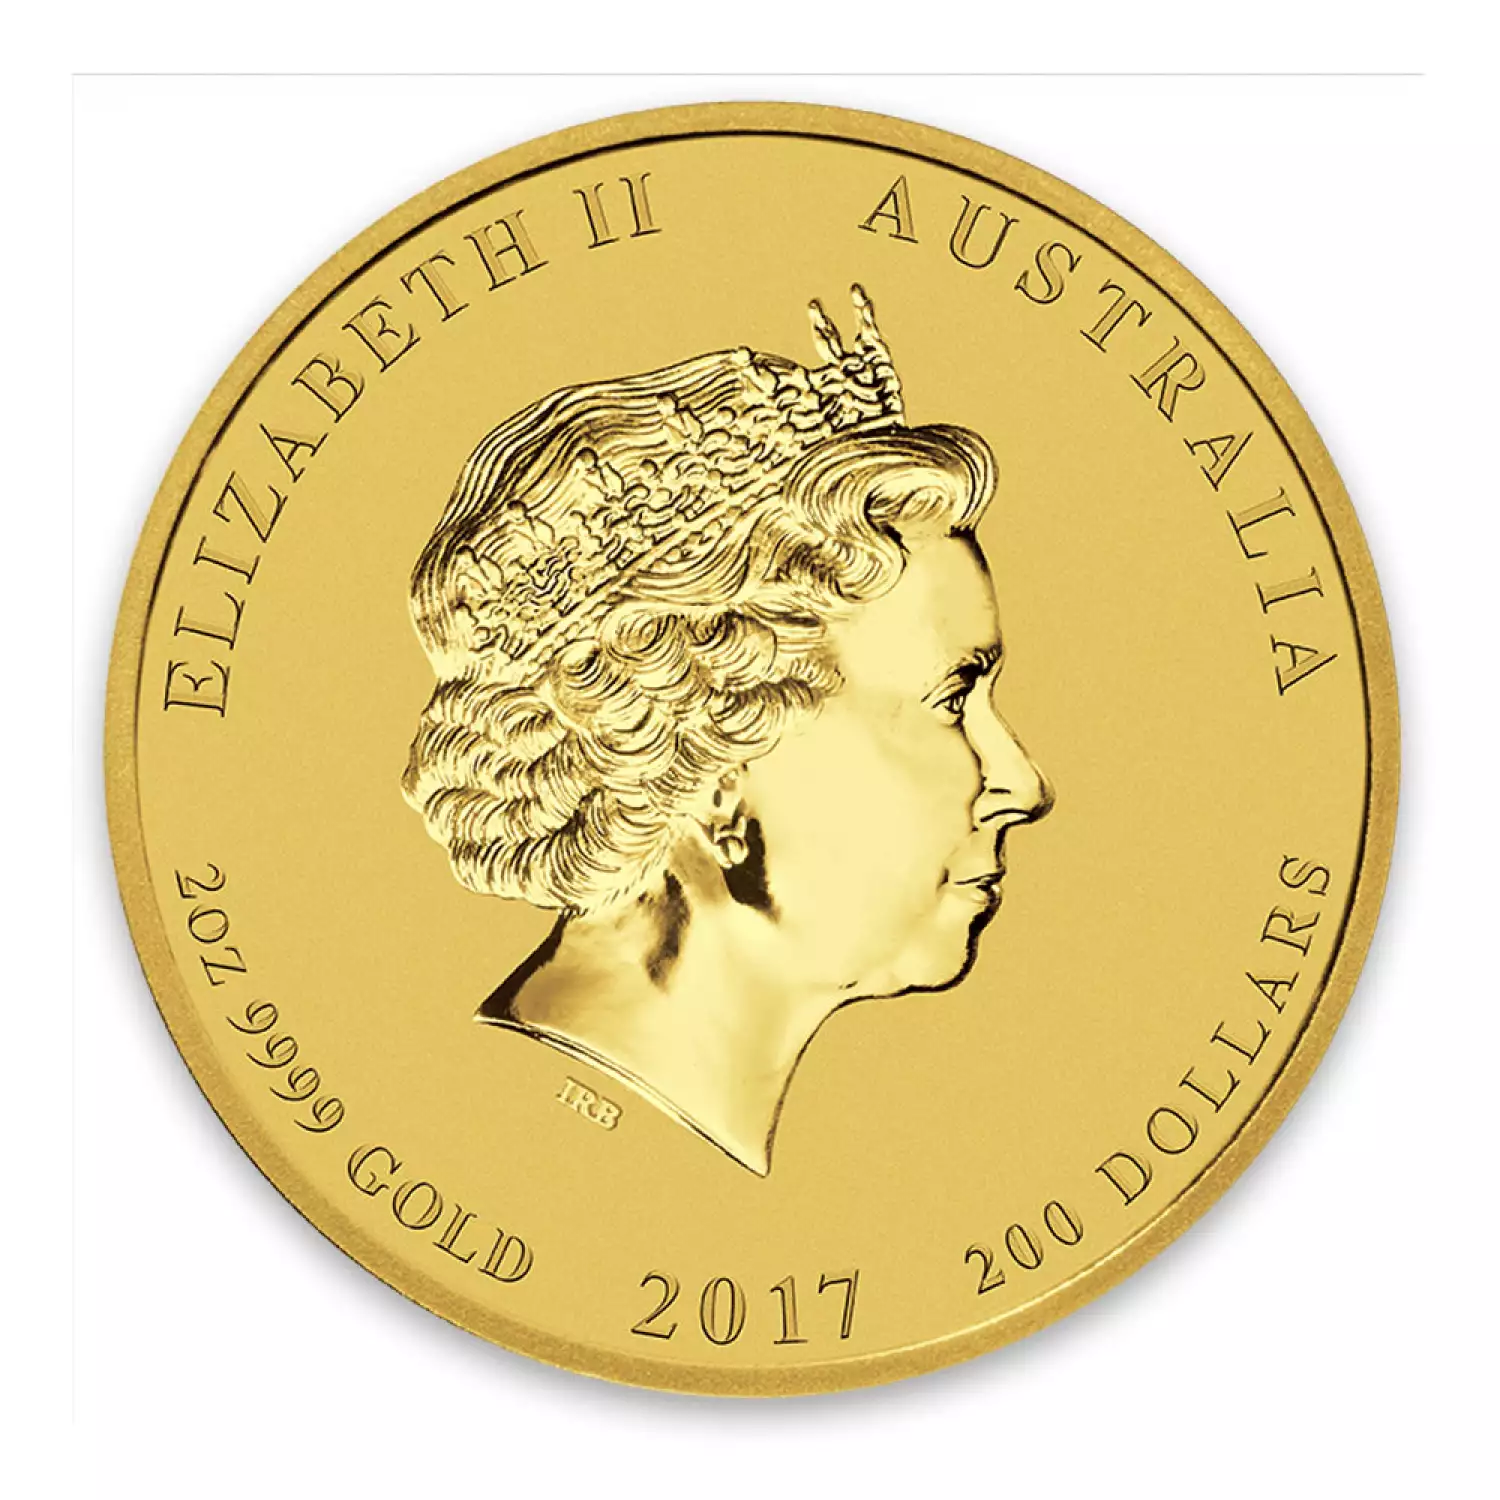 2017 2oz Australian Perth Mint Gold Lunar II: Year of the Rooster (2)